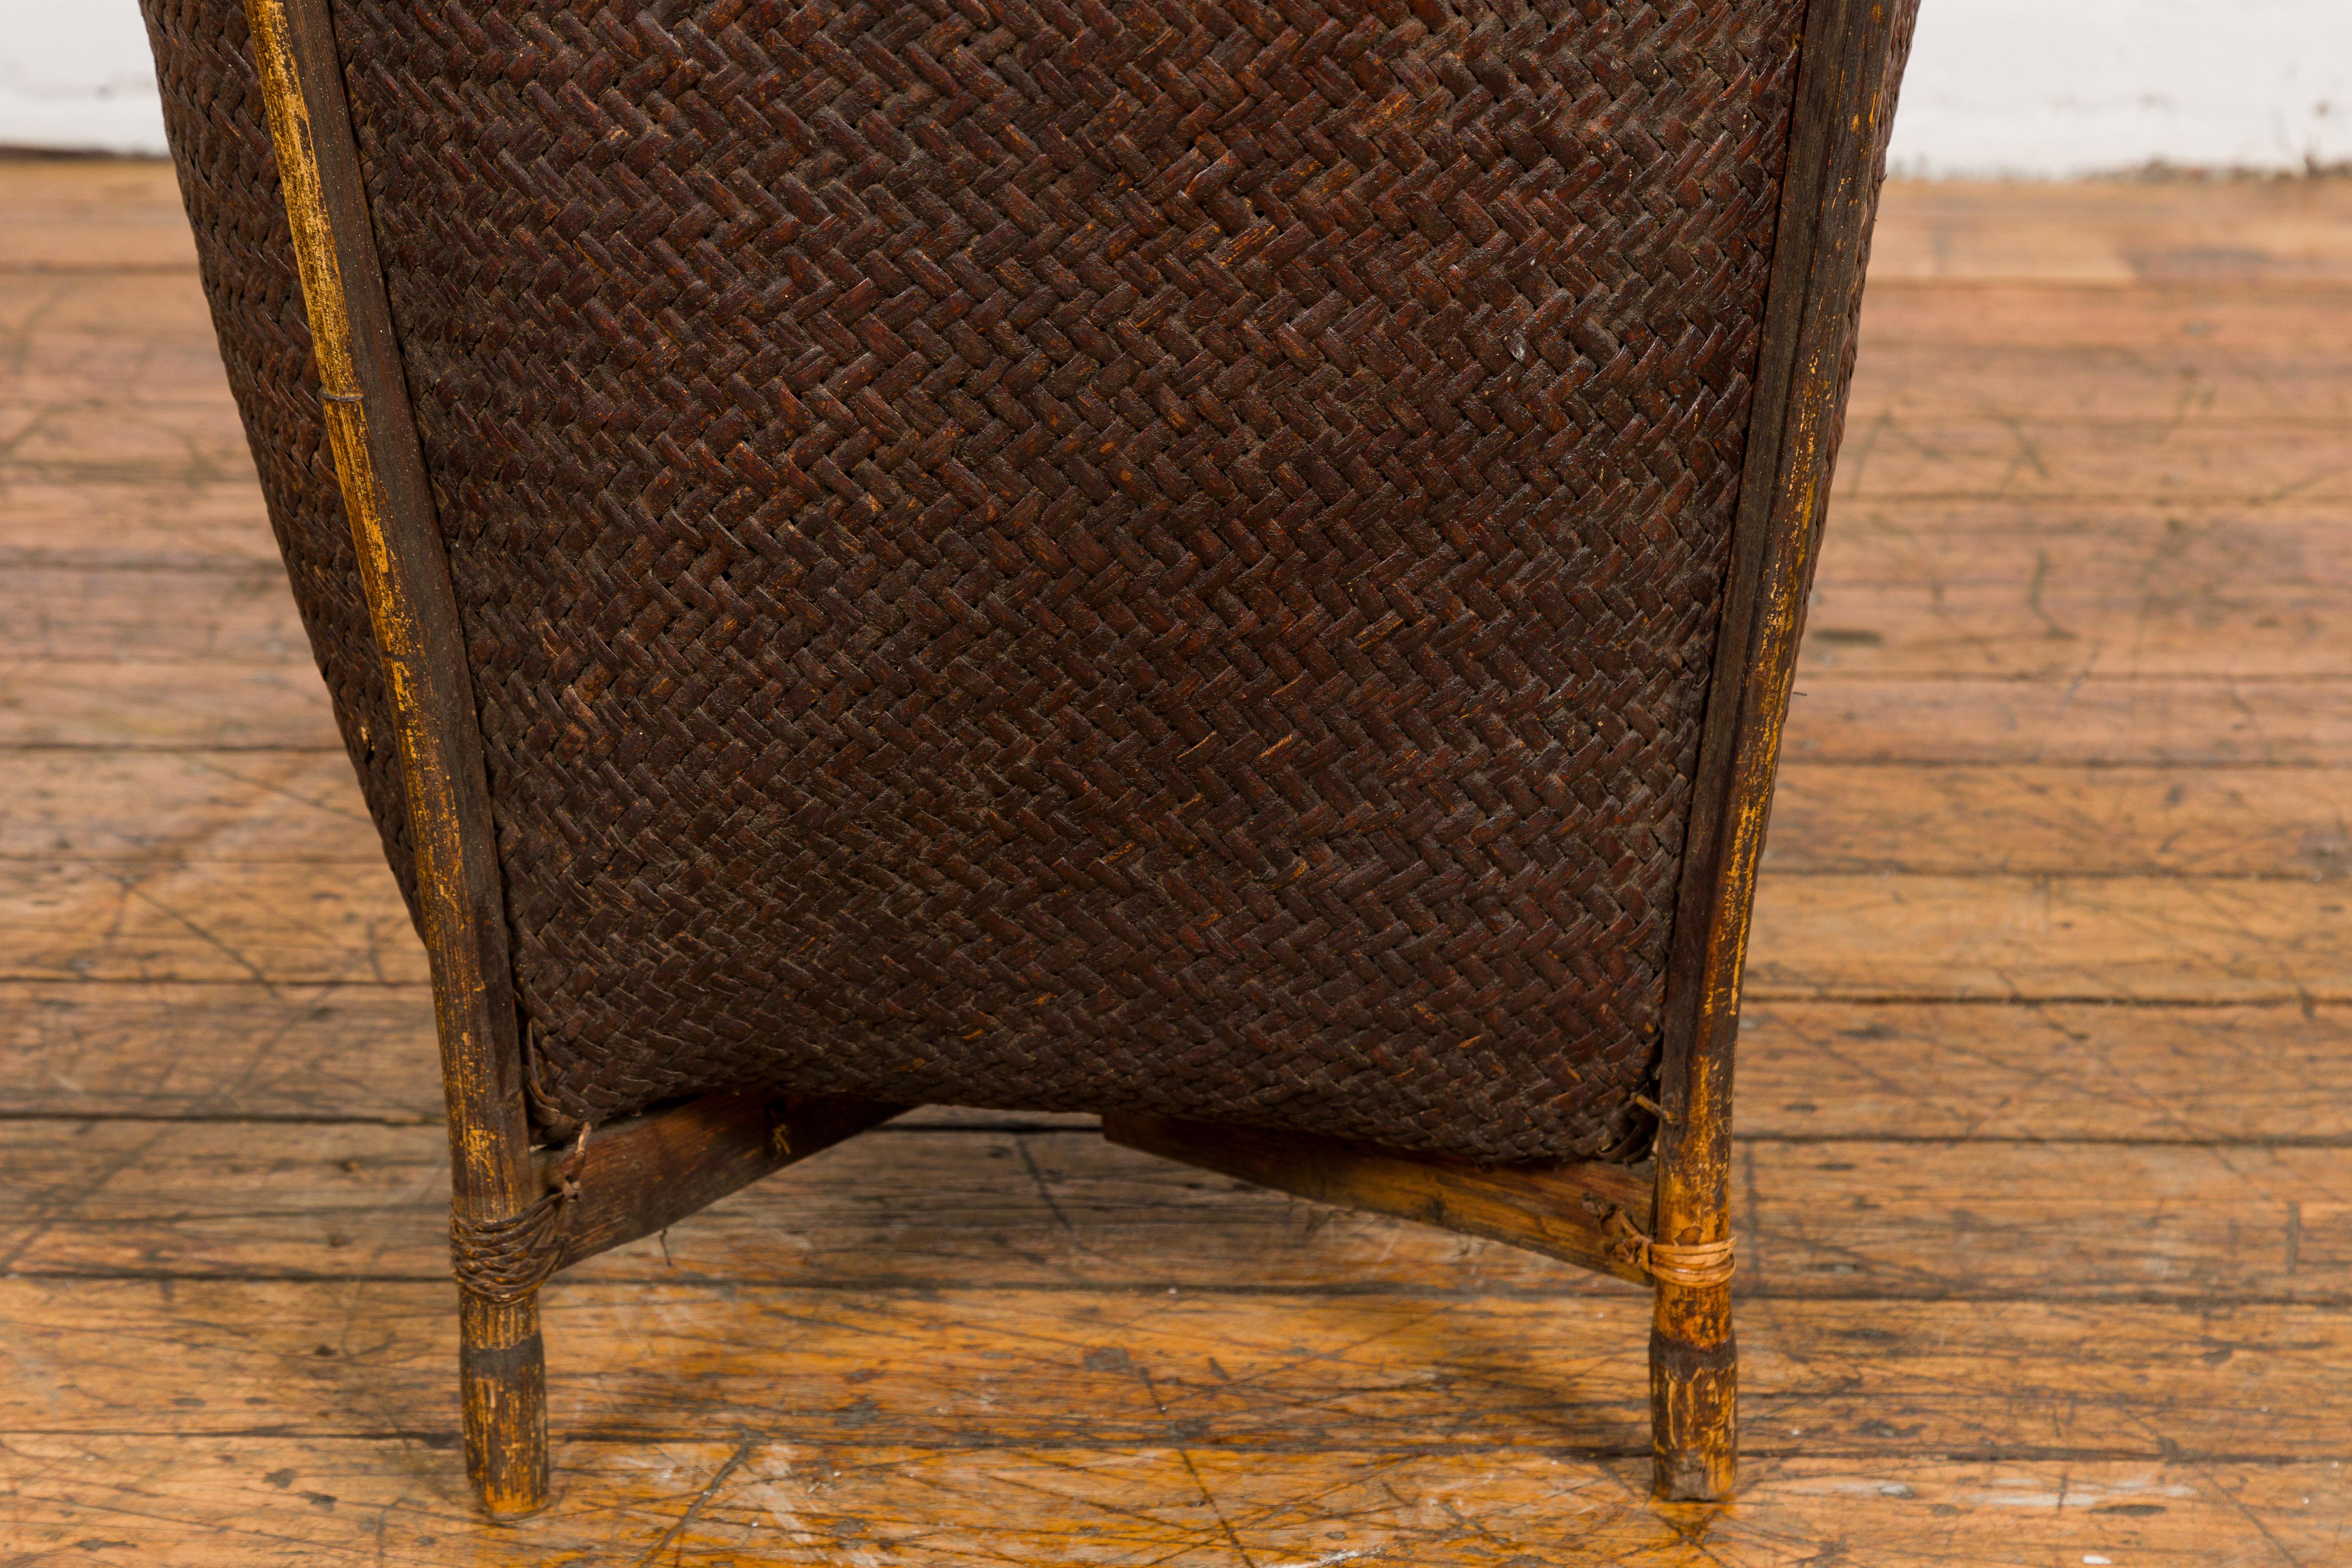 20th Century Rustic Wood and Woven Rattan Farmers Basket with Weathered Patina